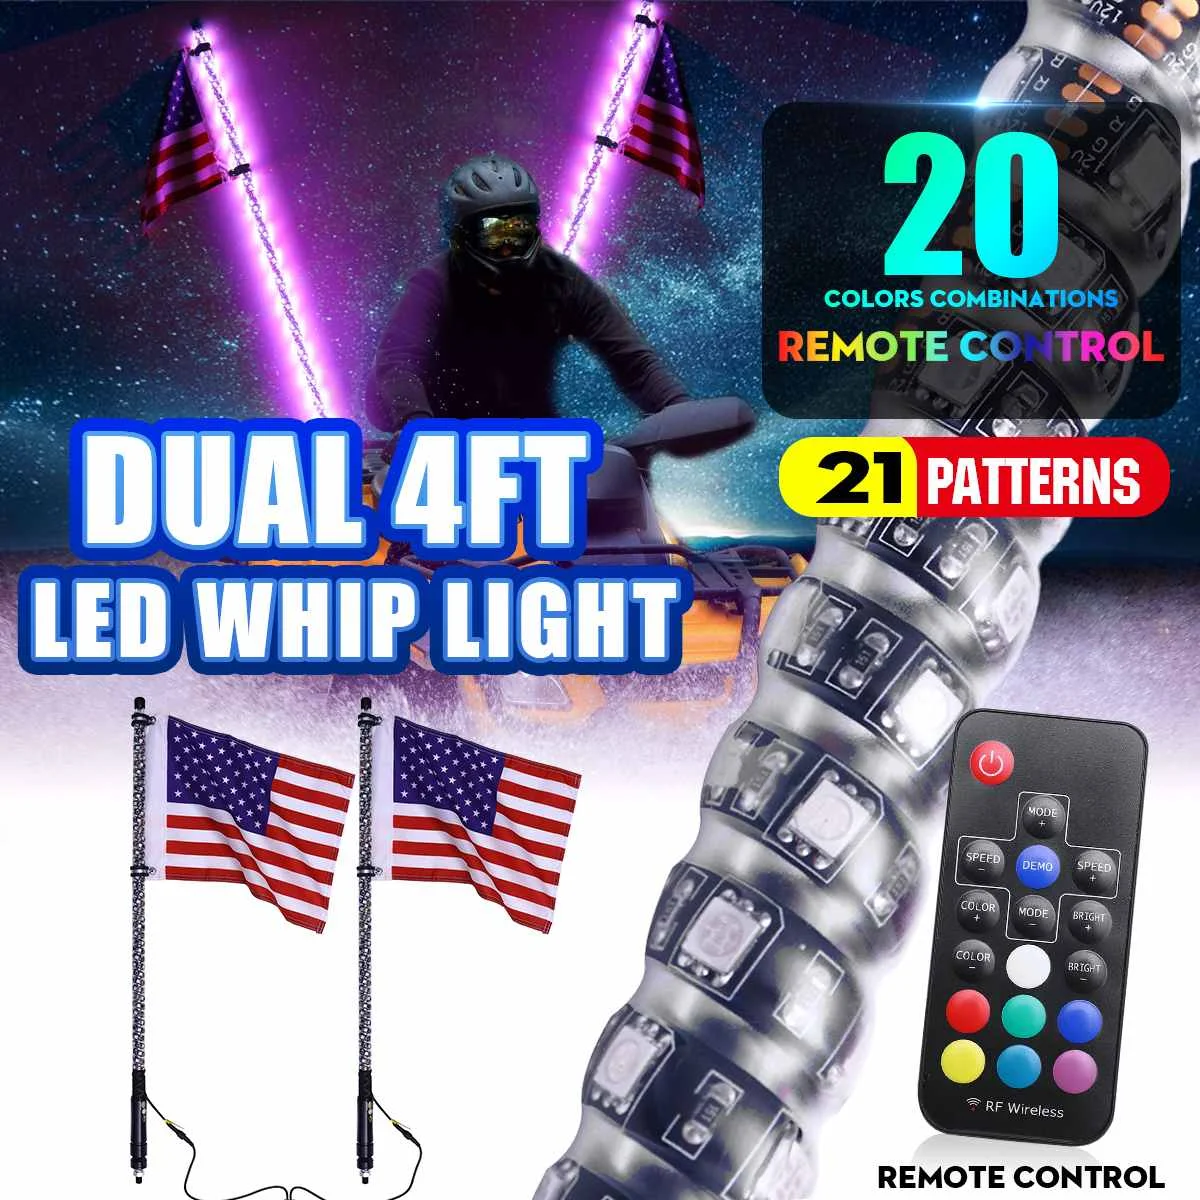 

1 Pair 4/5FT RGB Whip Light with Base Waterproof Bendable Wireless Remote Control Flagpole LED Lamp Light DC12V+America Flag